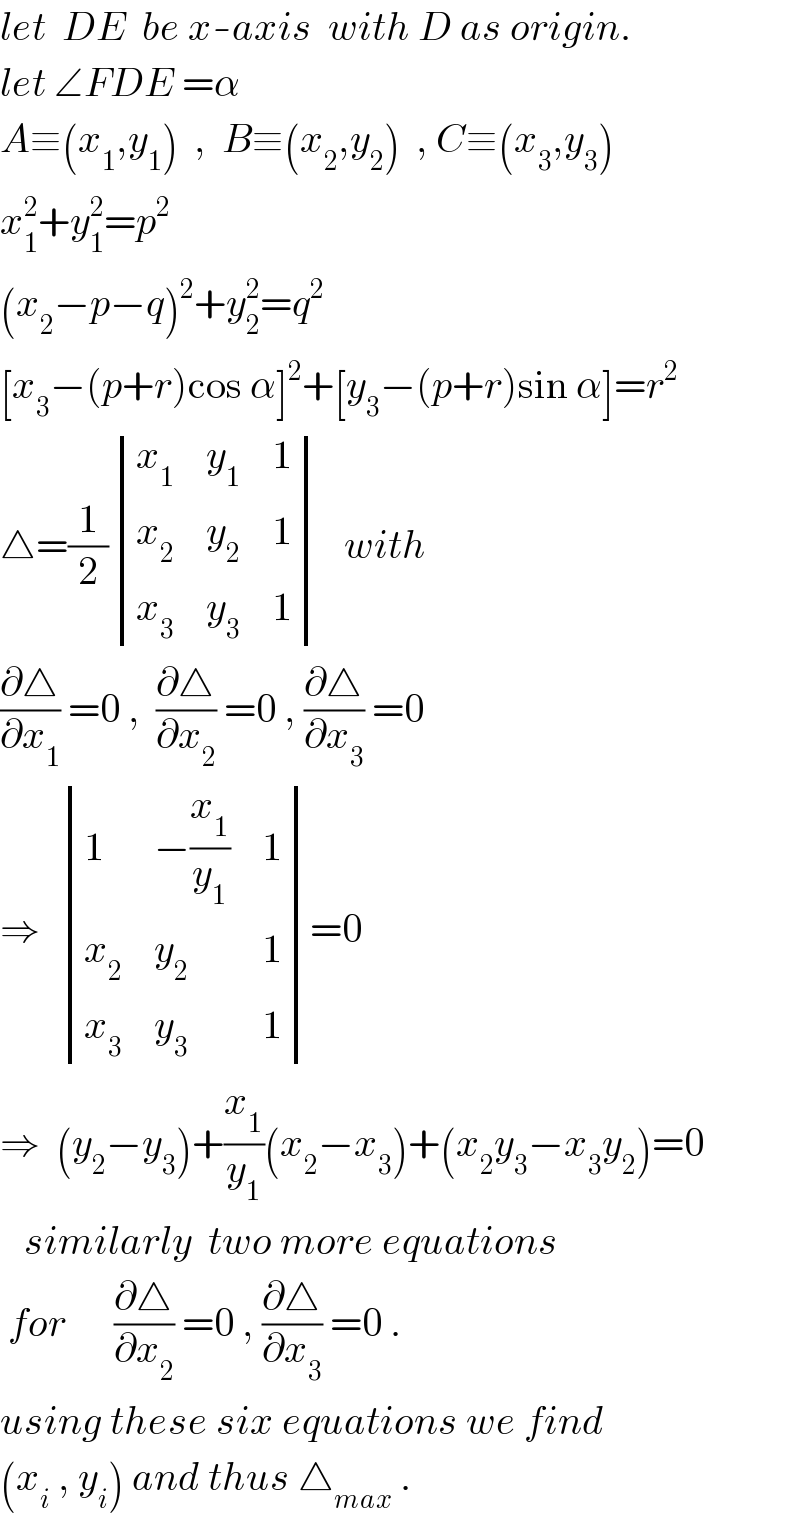 let  DE  be x-axis  with D as origin.  let ∠FDE =α  A≡(x_1 ,y_1 )  ,  B≡(x_2 ,y_2 )  , C≡(x_3 ,y_3 )  x_1 ^2 +y_1 ^2 =p^2   (x_2 −p−q)^2 +y_2 ^2 =q^2   [x_3 −(p+r)cos α]^2 +[y_3 −(p+r)sin α]=r^2   △=(1/2) determinant ((x_1 ,y_1 ,1),(x_2 ,y_2 ,1),(x_3 ,y_3 ,1))   with  (∂△/∂x_1 ) =0 ,  (∂△/∂x_2 ) =0 , (∂△/∂x_3 ) =0  ⇒   determinant ((1,(−(x_1 /y_1 )),1),(x_2 ,y_2 ,1),(x_3 ,y_3 ,1))=0  ⇒  (y_2 −y_3 )+(x_1 /y_1 )(x_2 −x_3 )+(x_2 y_3 −x_3 y_2 )=0     similarly  two more equations   for      (∂△/∂x_2 ) =0 , (∂△/∂x_3 ) =0 .  using these six equations we find  (x_i  , y_i ) and thus △_(max)  .  